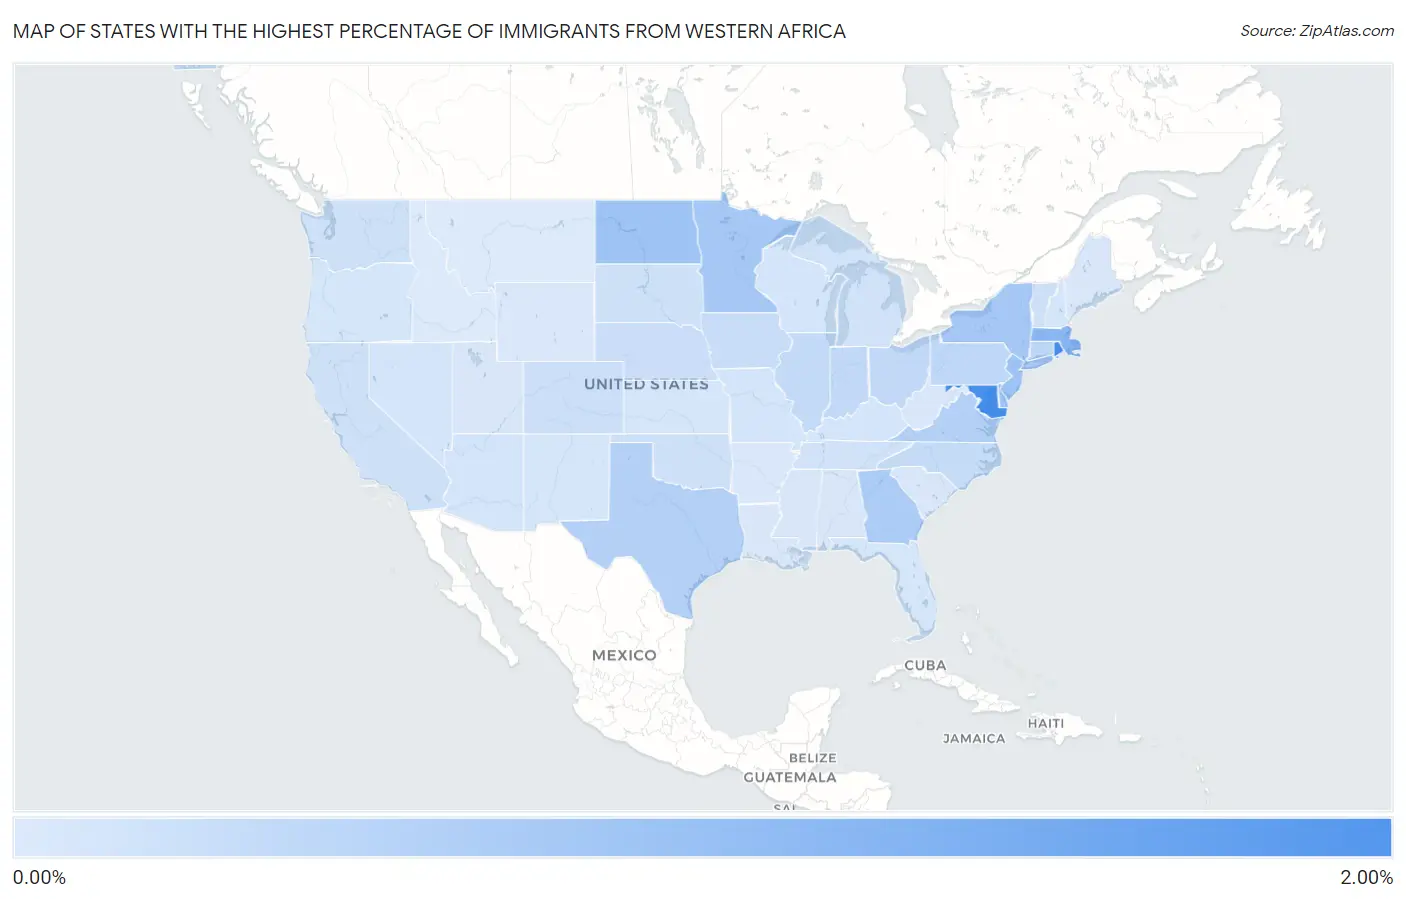 States with the Highest Percentage of Immigrants from Western Africa in the United States Map